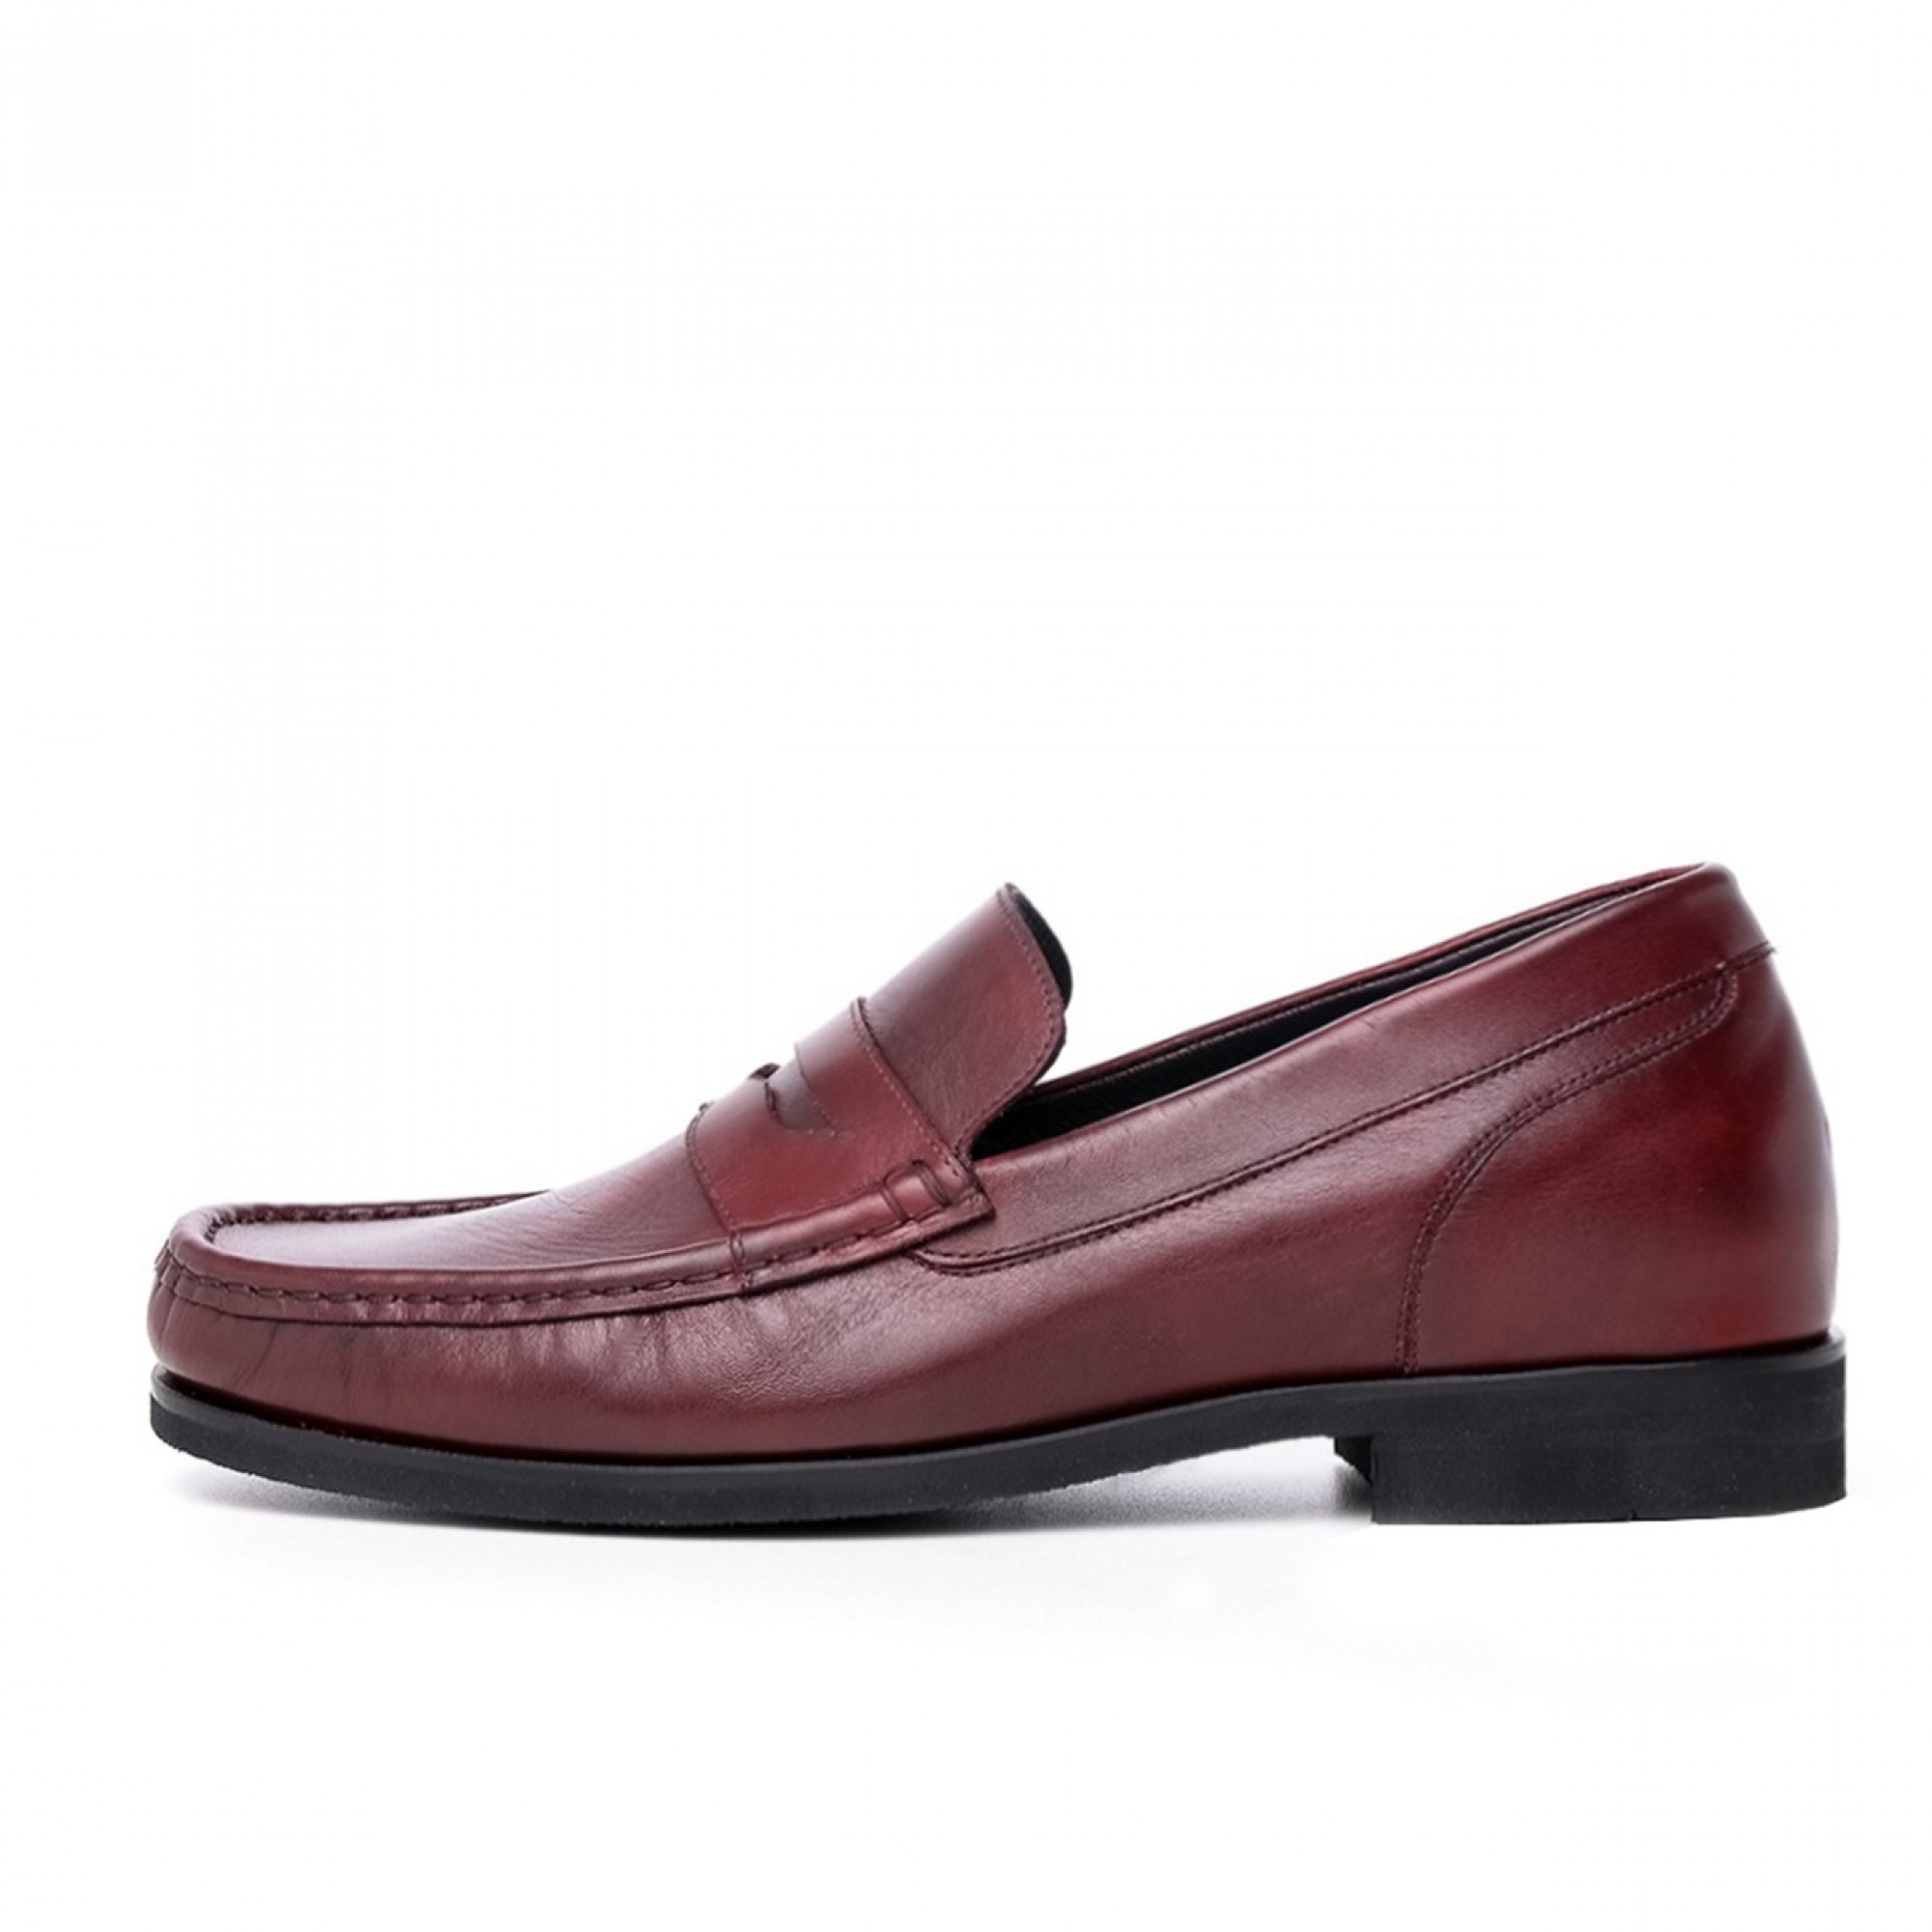 Bari - Elevator Loafers in Full Grain Leather up to 2.6 inches